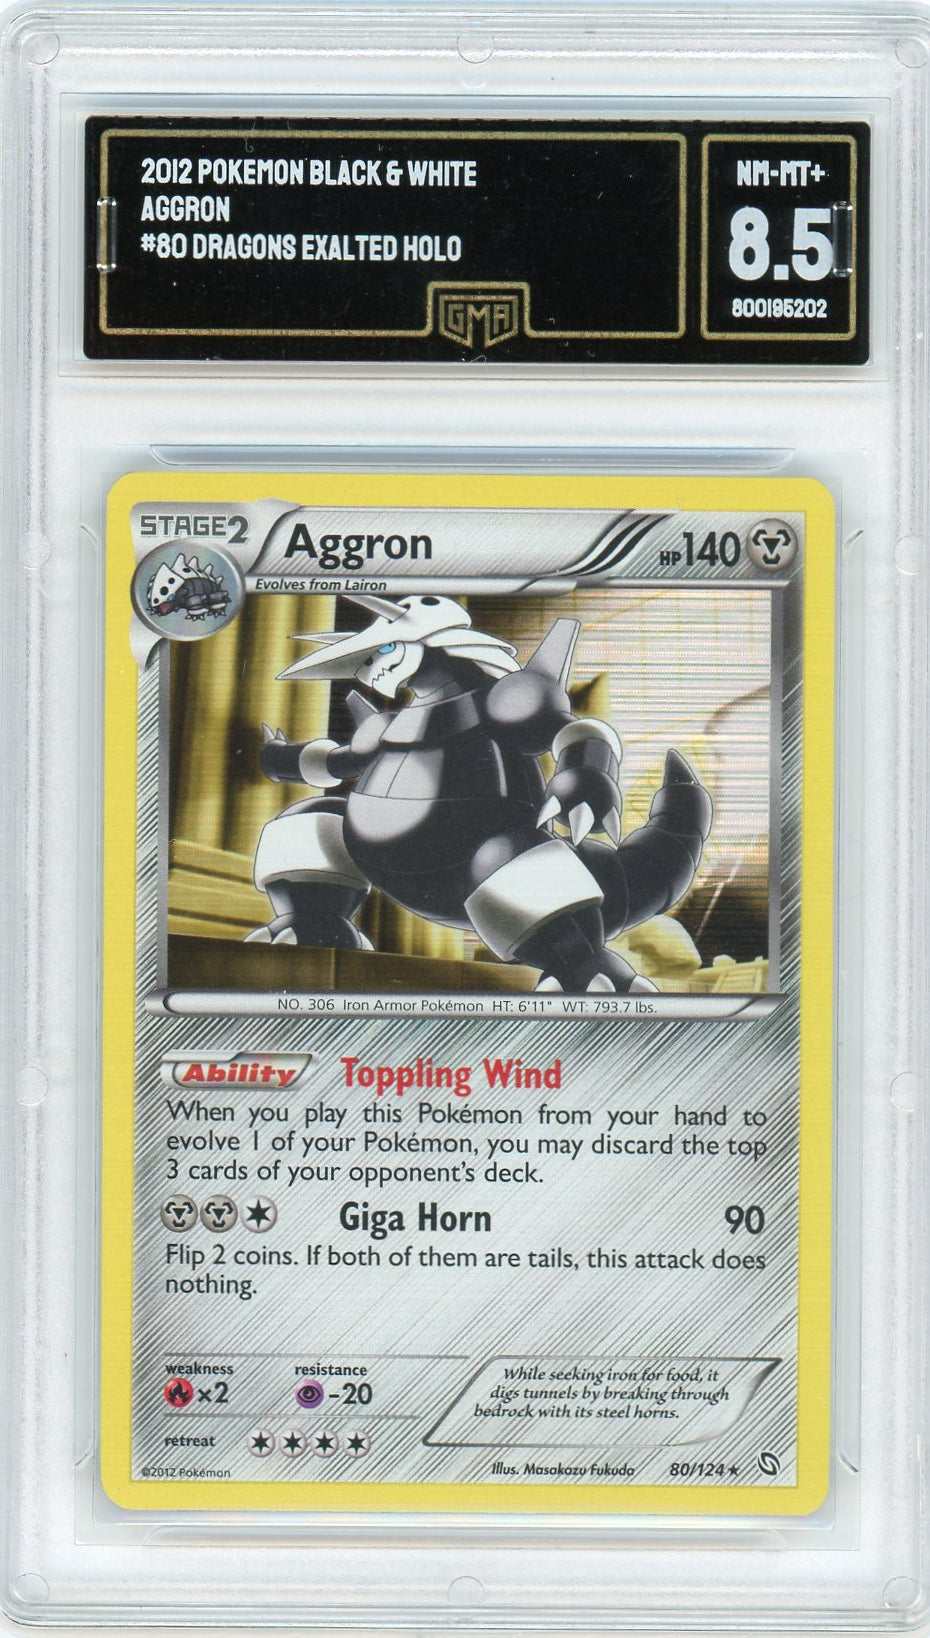 GMA 8.5 NM-MT+ Aggron Holo 80/124 - Dragons Exalted 2012